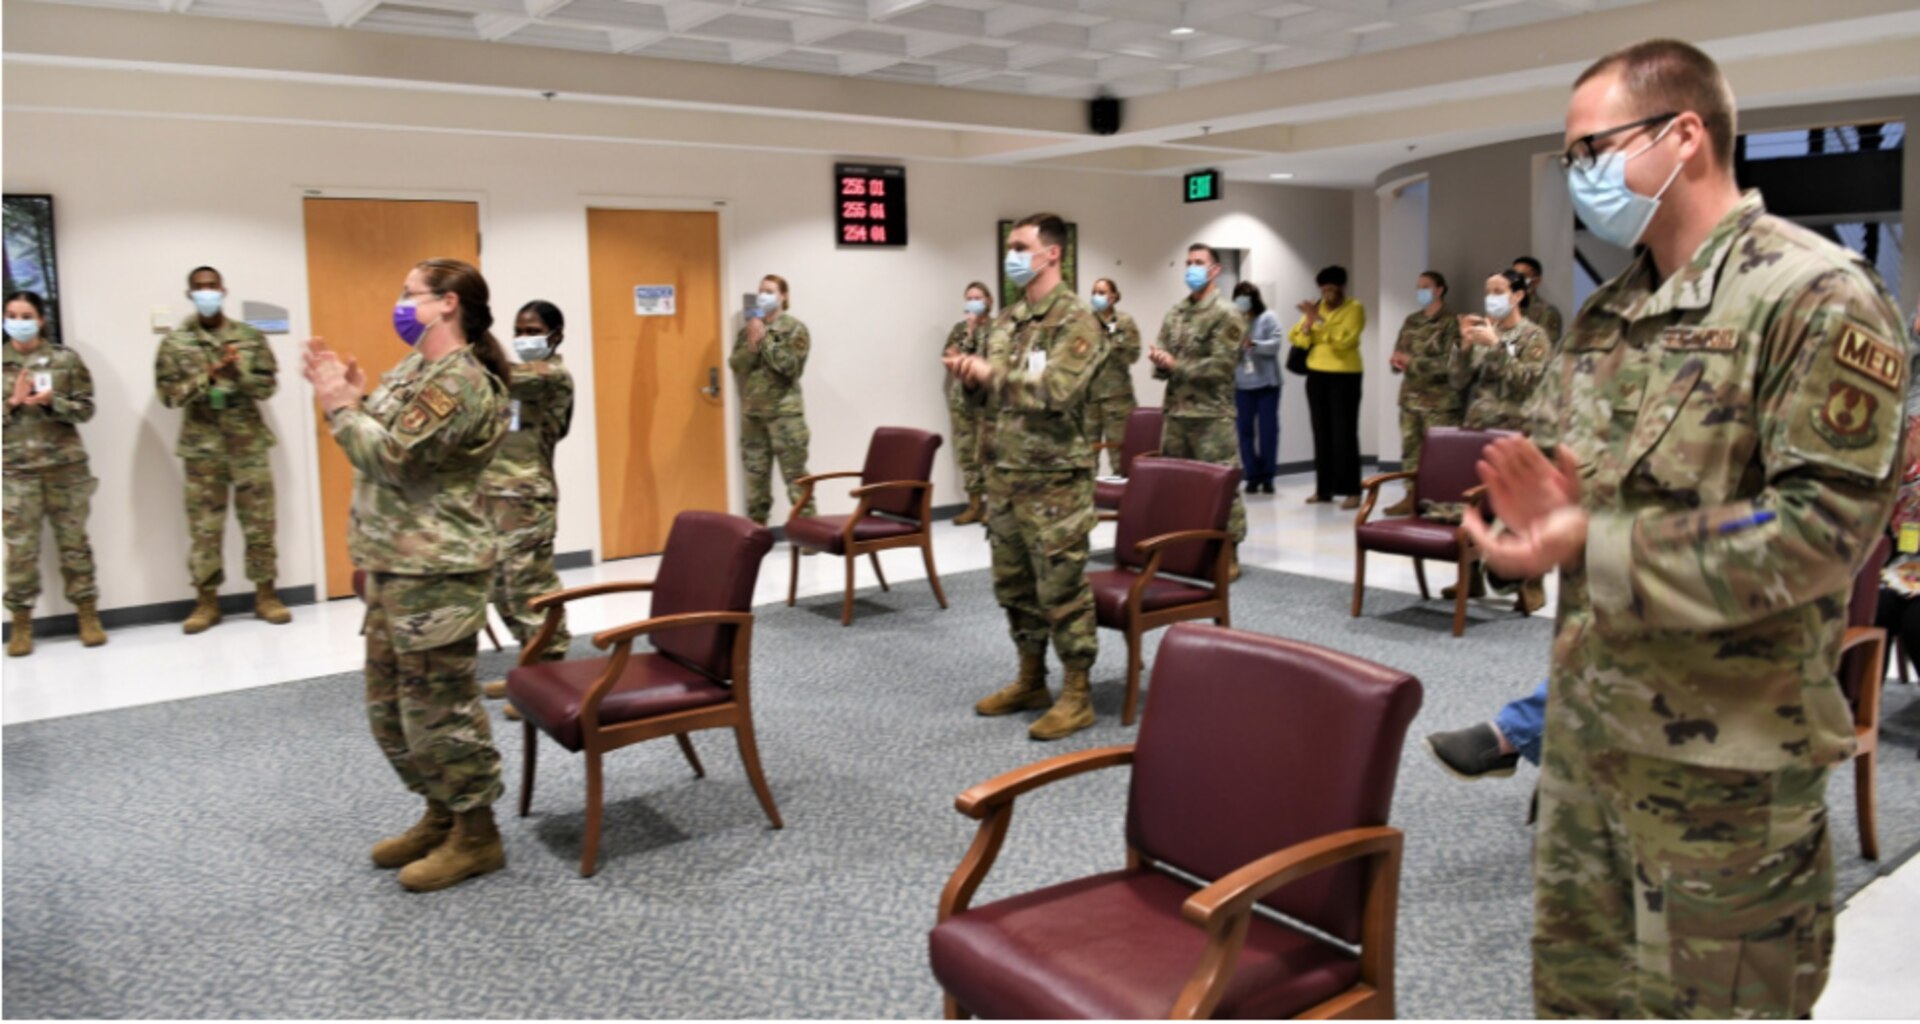 ROBINS AIR FORCE BASE, Ga. – Members of the 78th Medical Group celebrate inside the clinic’s atrium at Robins Air Force Base, Georgia, March 1, 2021.